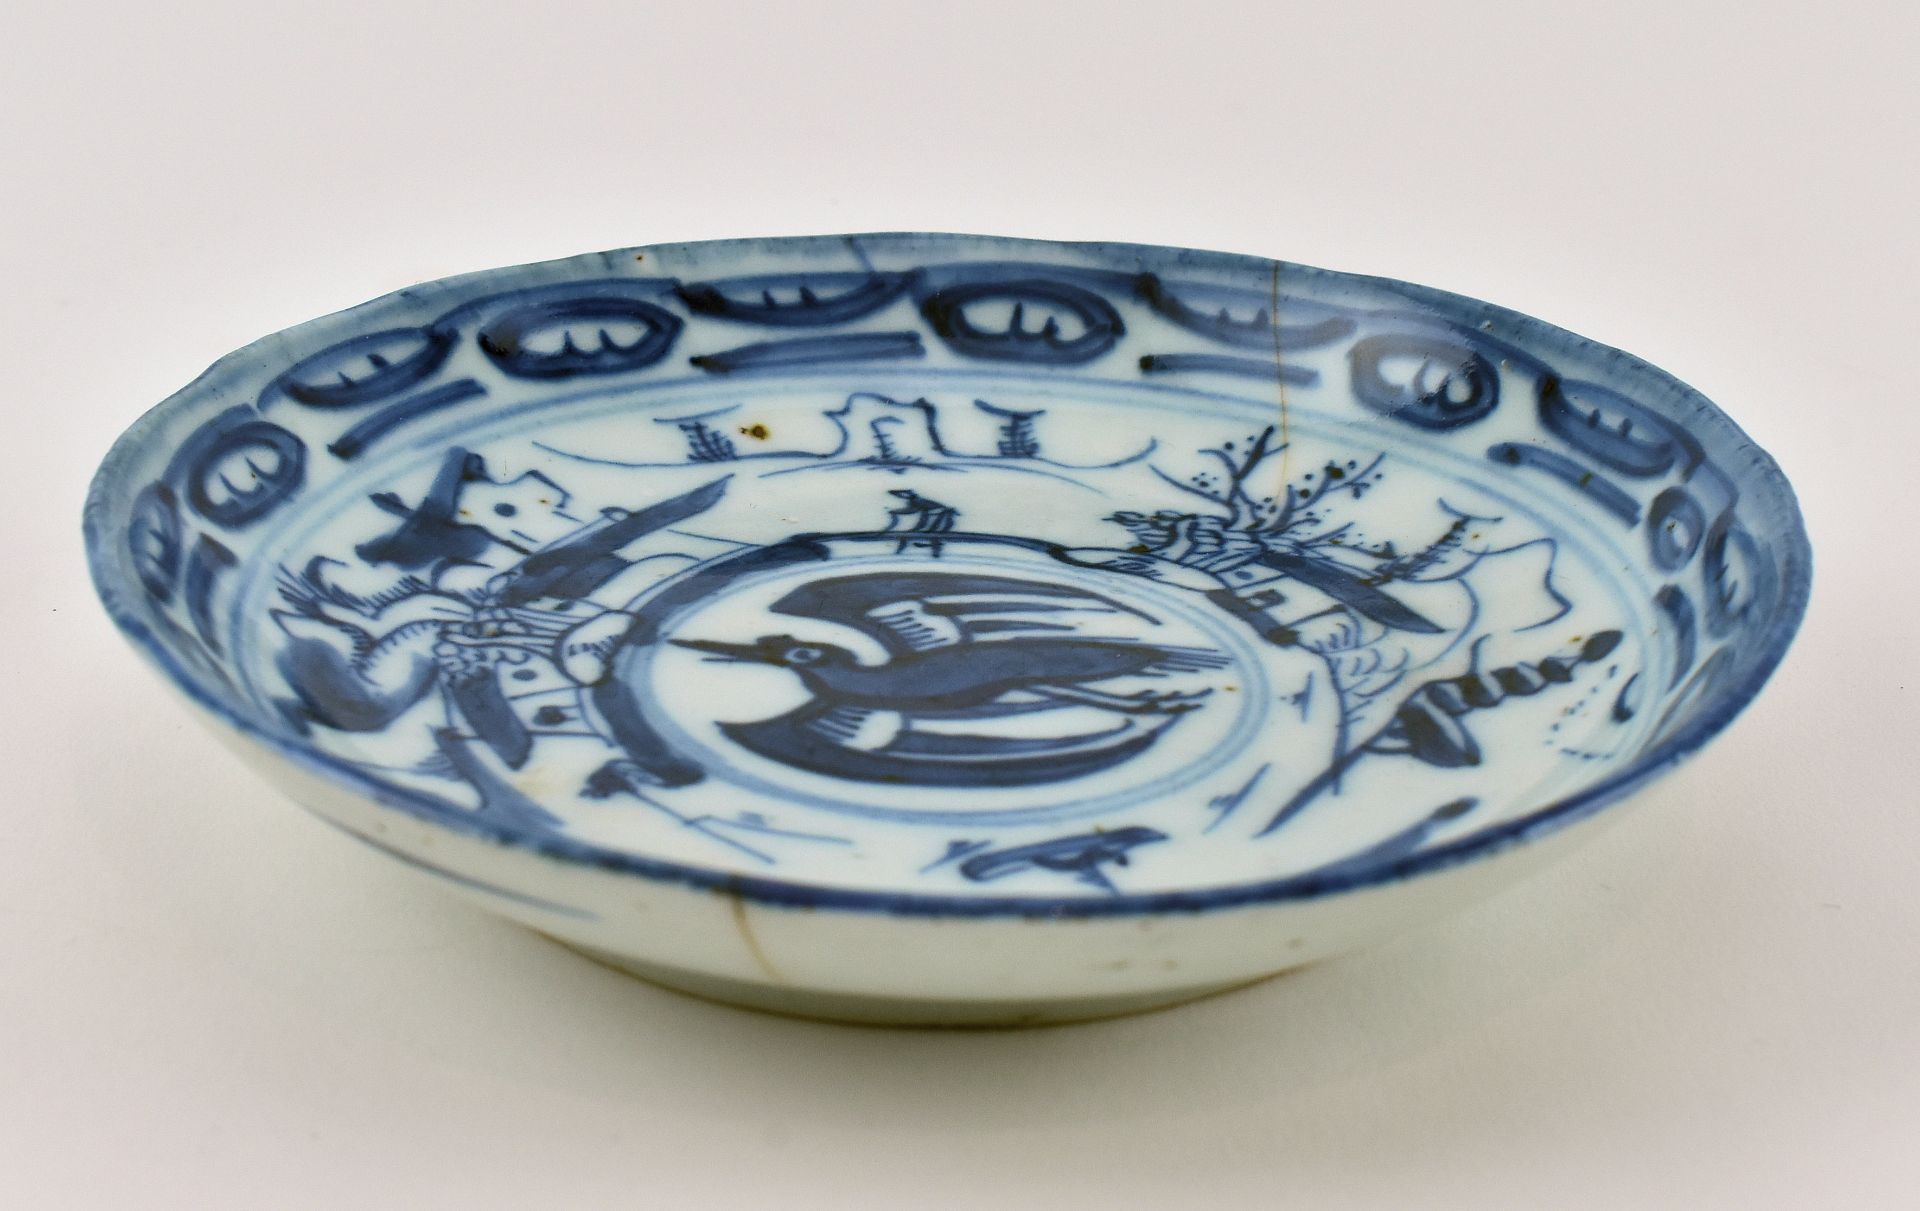 QING DAOGUANG BLUE AND WHITE PLATE 清 道光 青花山水盘 - Image 4 of 8